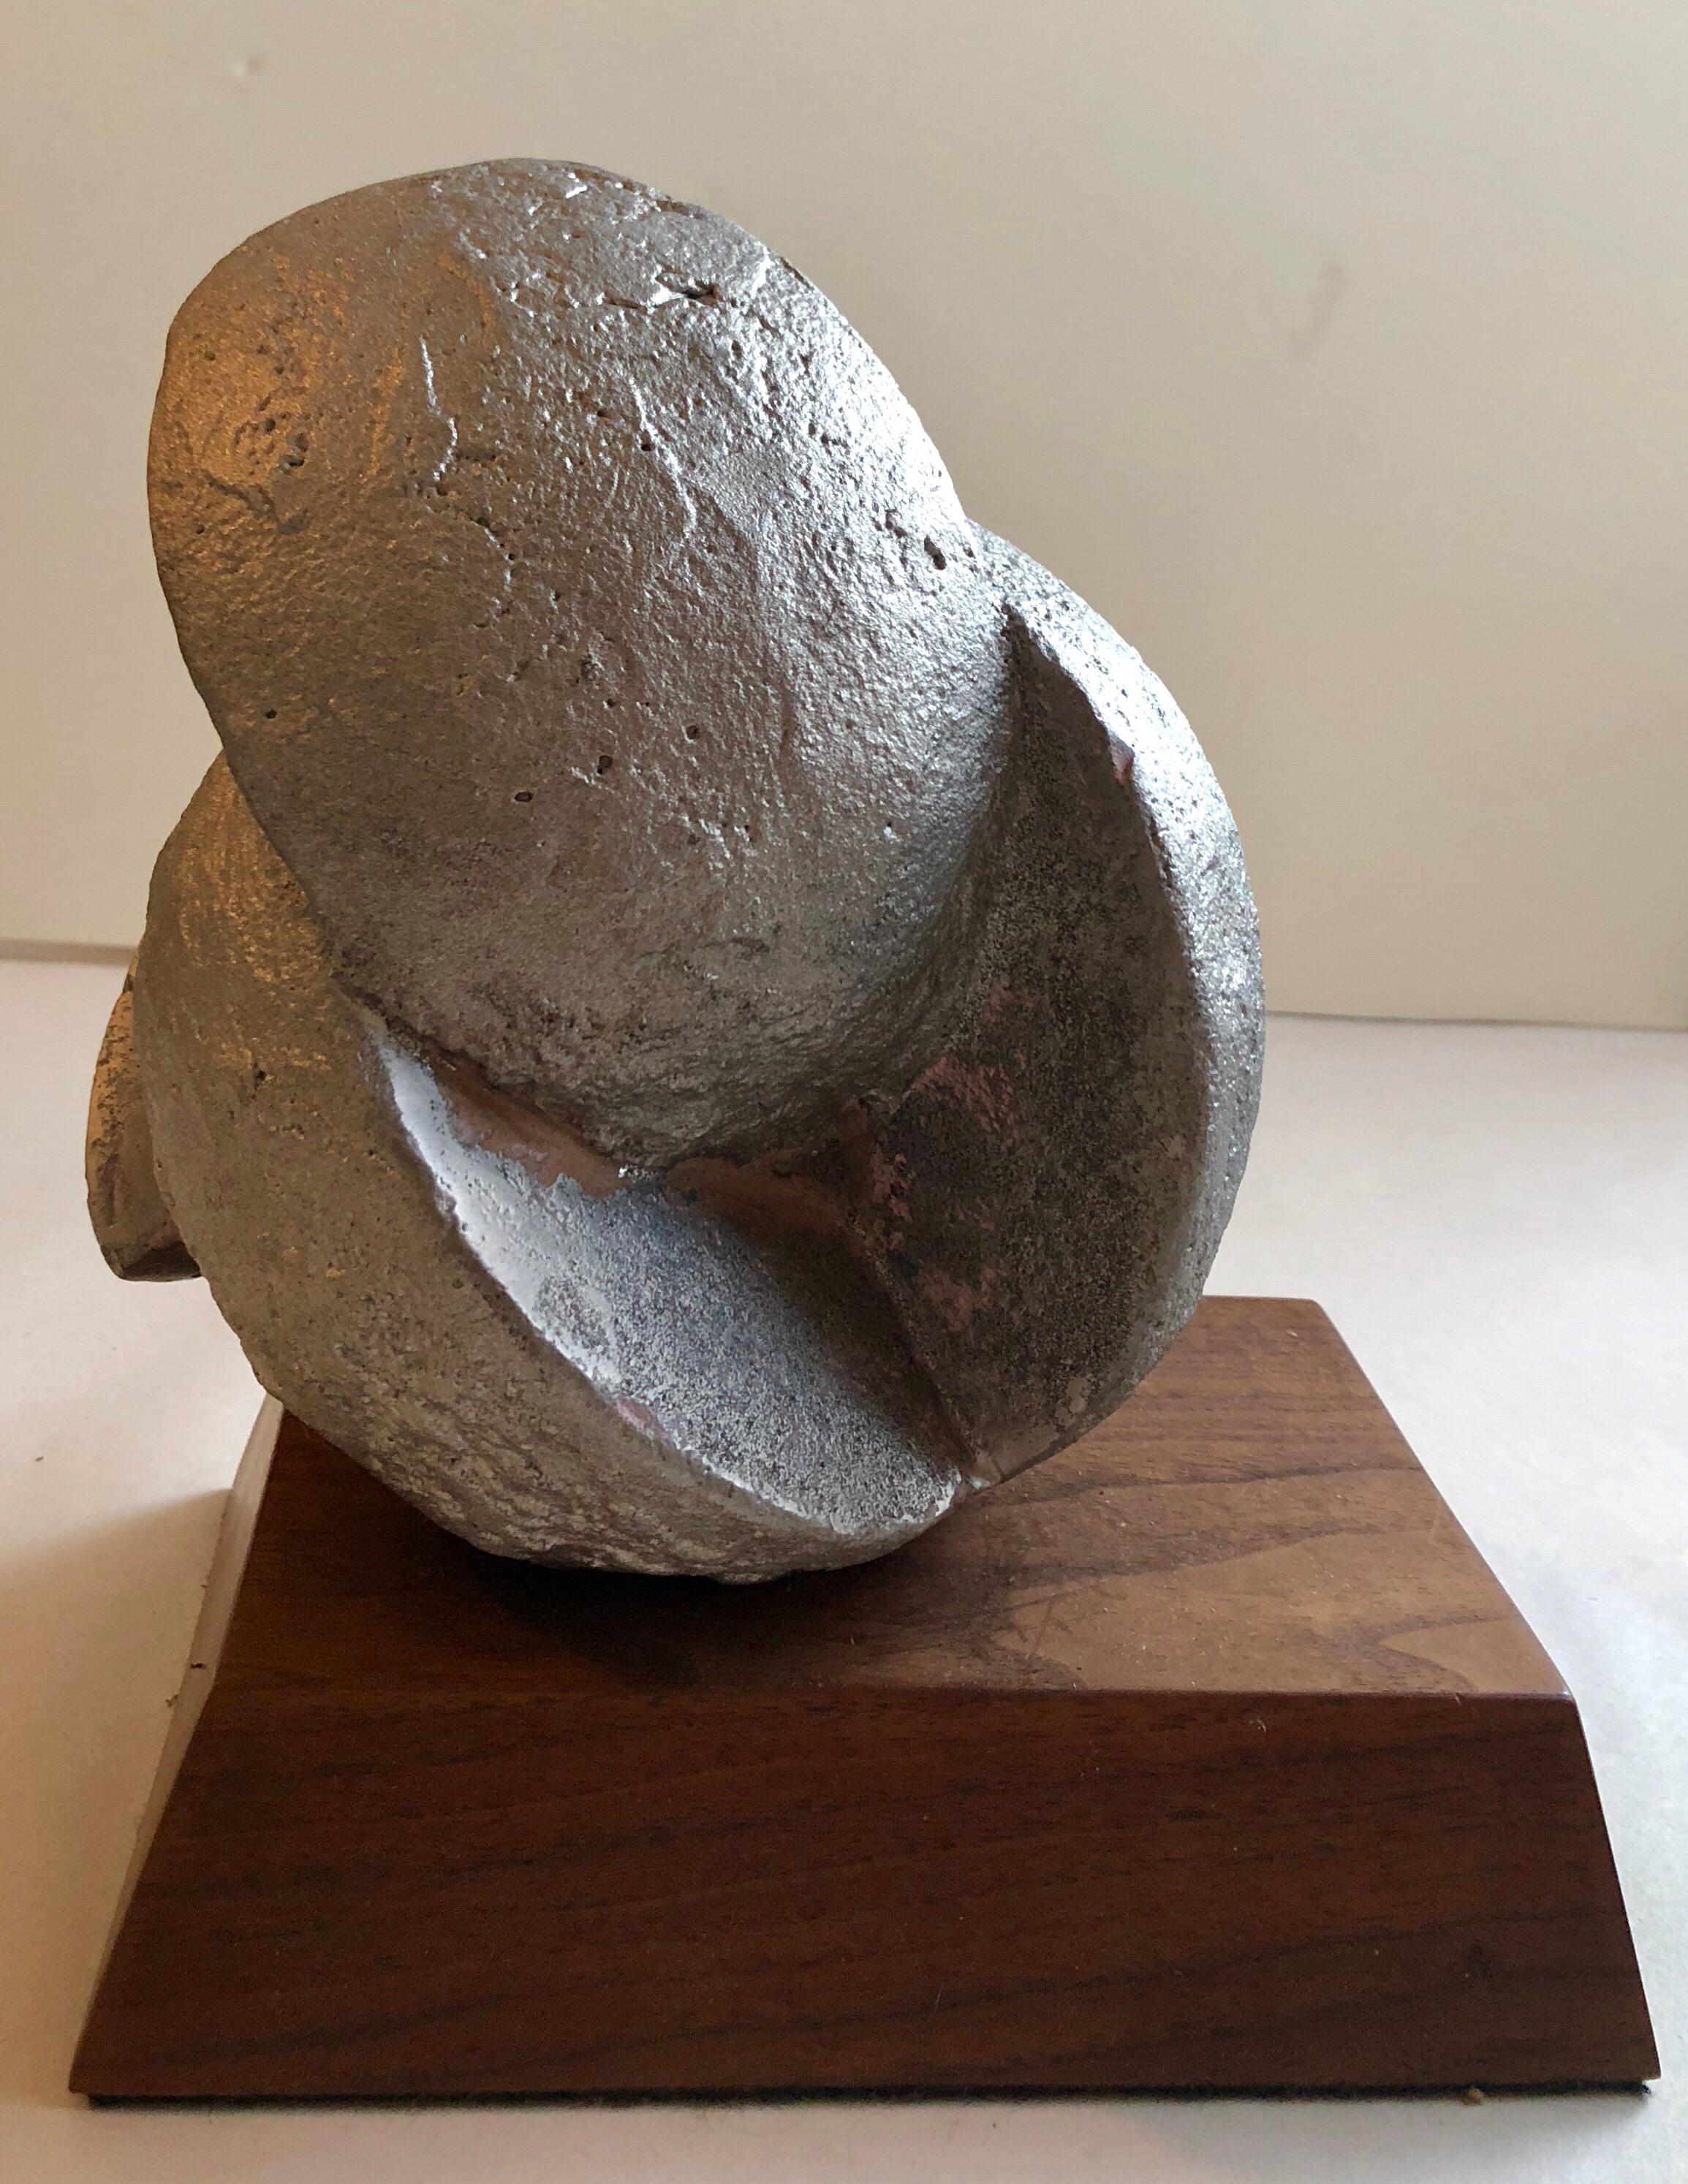 Cubist abstract metal sculpture by the artist David John Barr. This 1990's artwork titled 